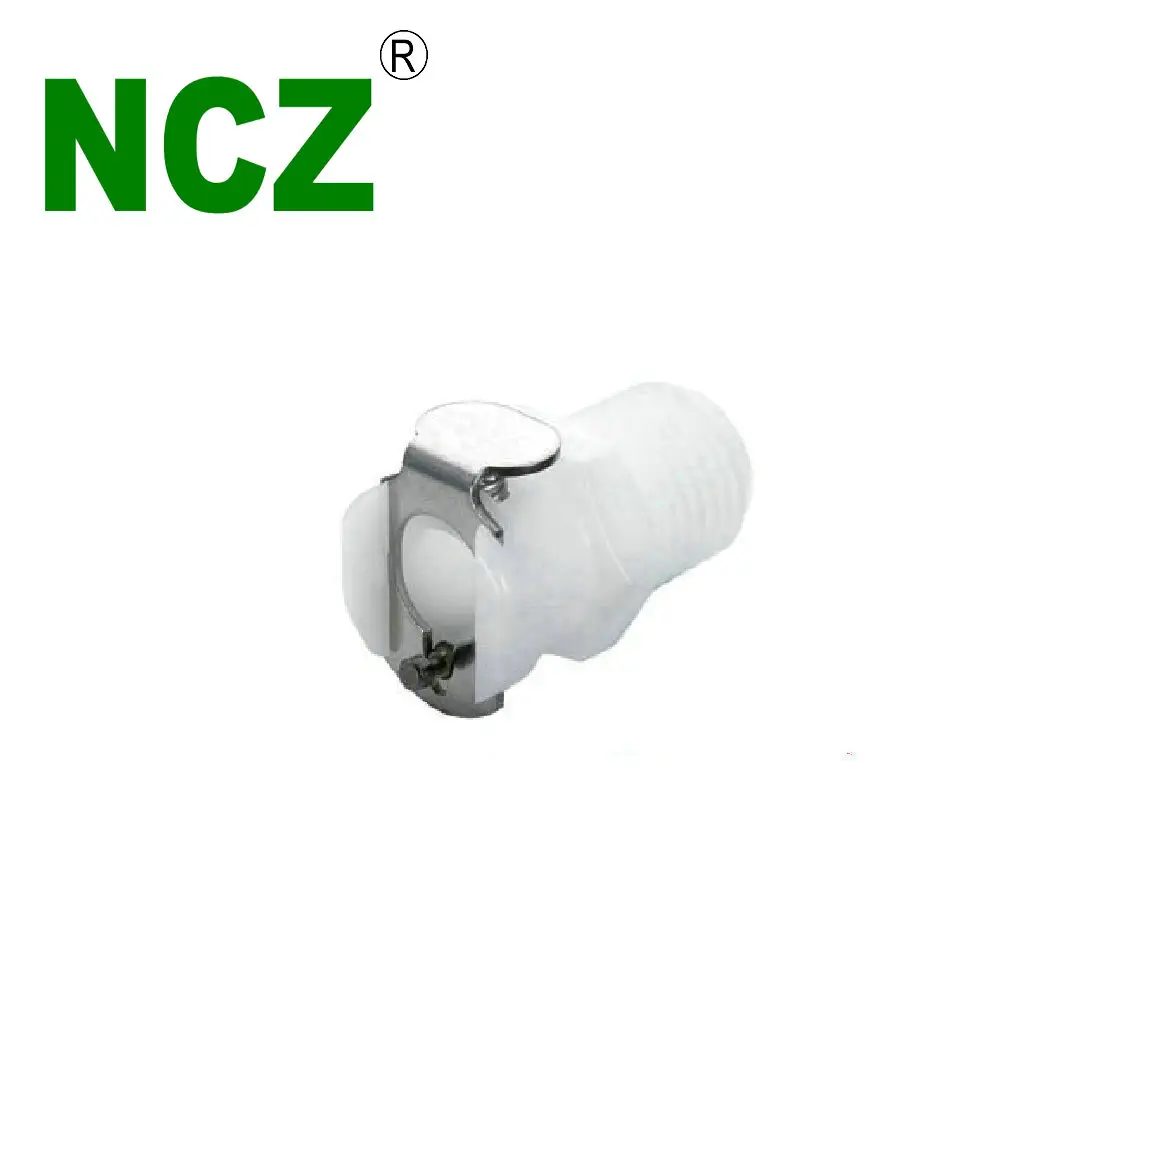 NCZ 1/8" flow RS-PMC Series cpc ftiings IN-LINE PIPE THREAD plcd 10004 10006 Fluid coupling Quick connector medical beauty